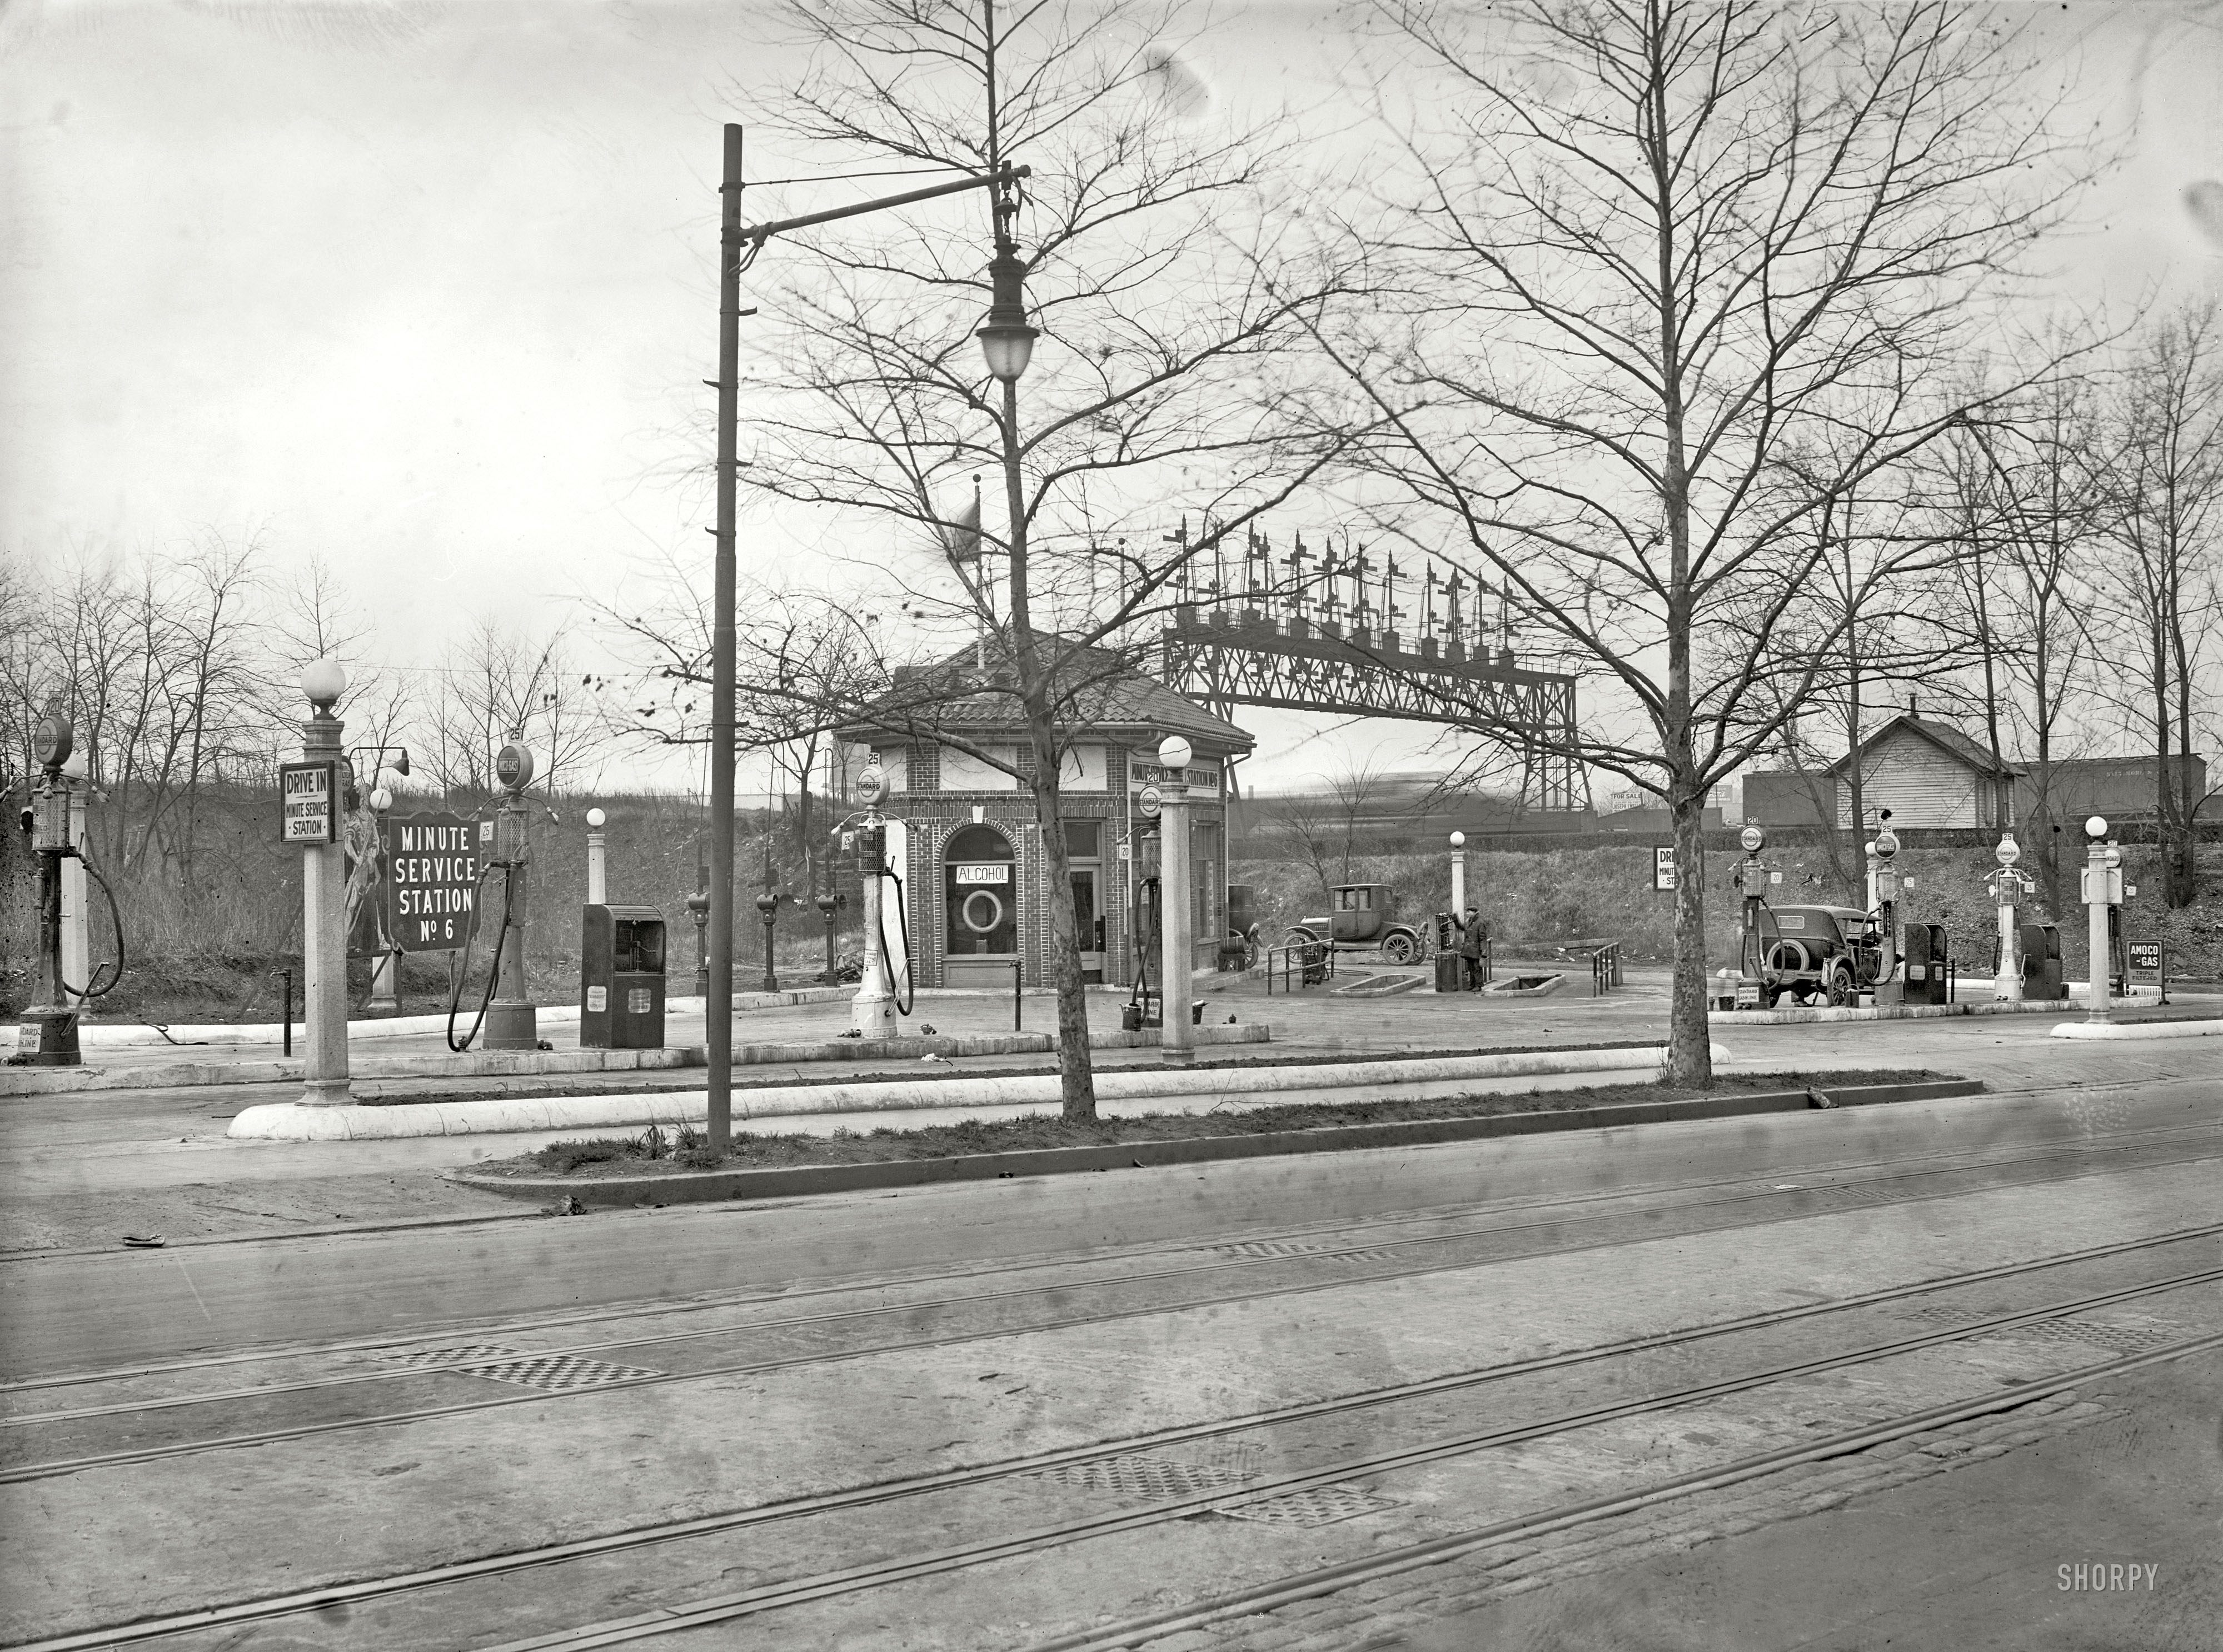 1925. "Texas Co., Third Street & Florida Avenue N.E." One in a series of photos, evidently commissioned by Texaco, of service stations in and around Washington, D.C. Here we have the added attraction of a speeding train. View full size.